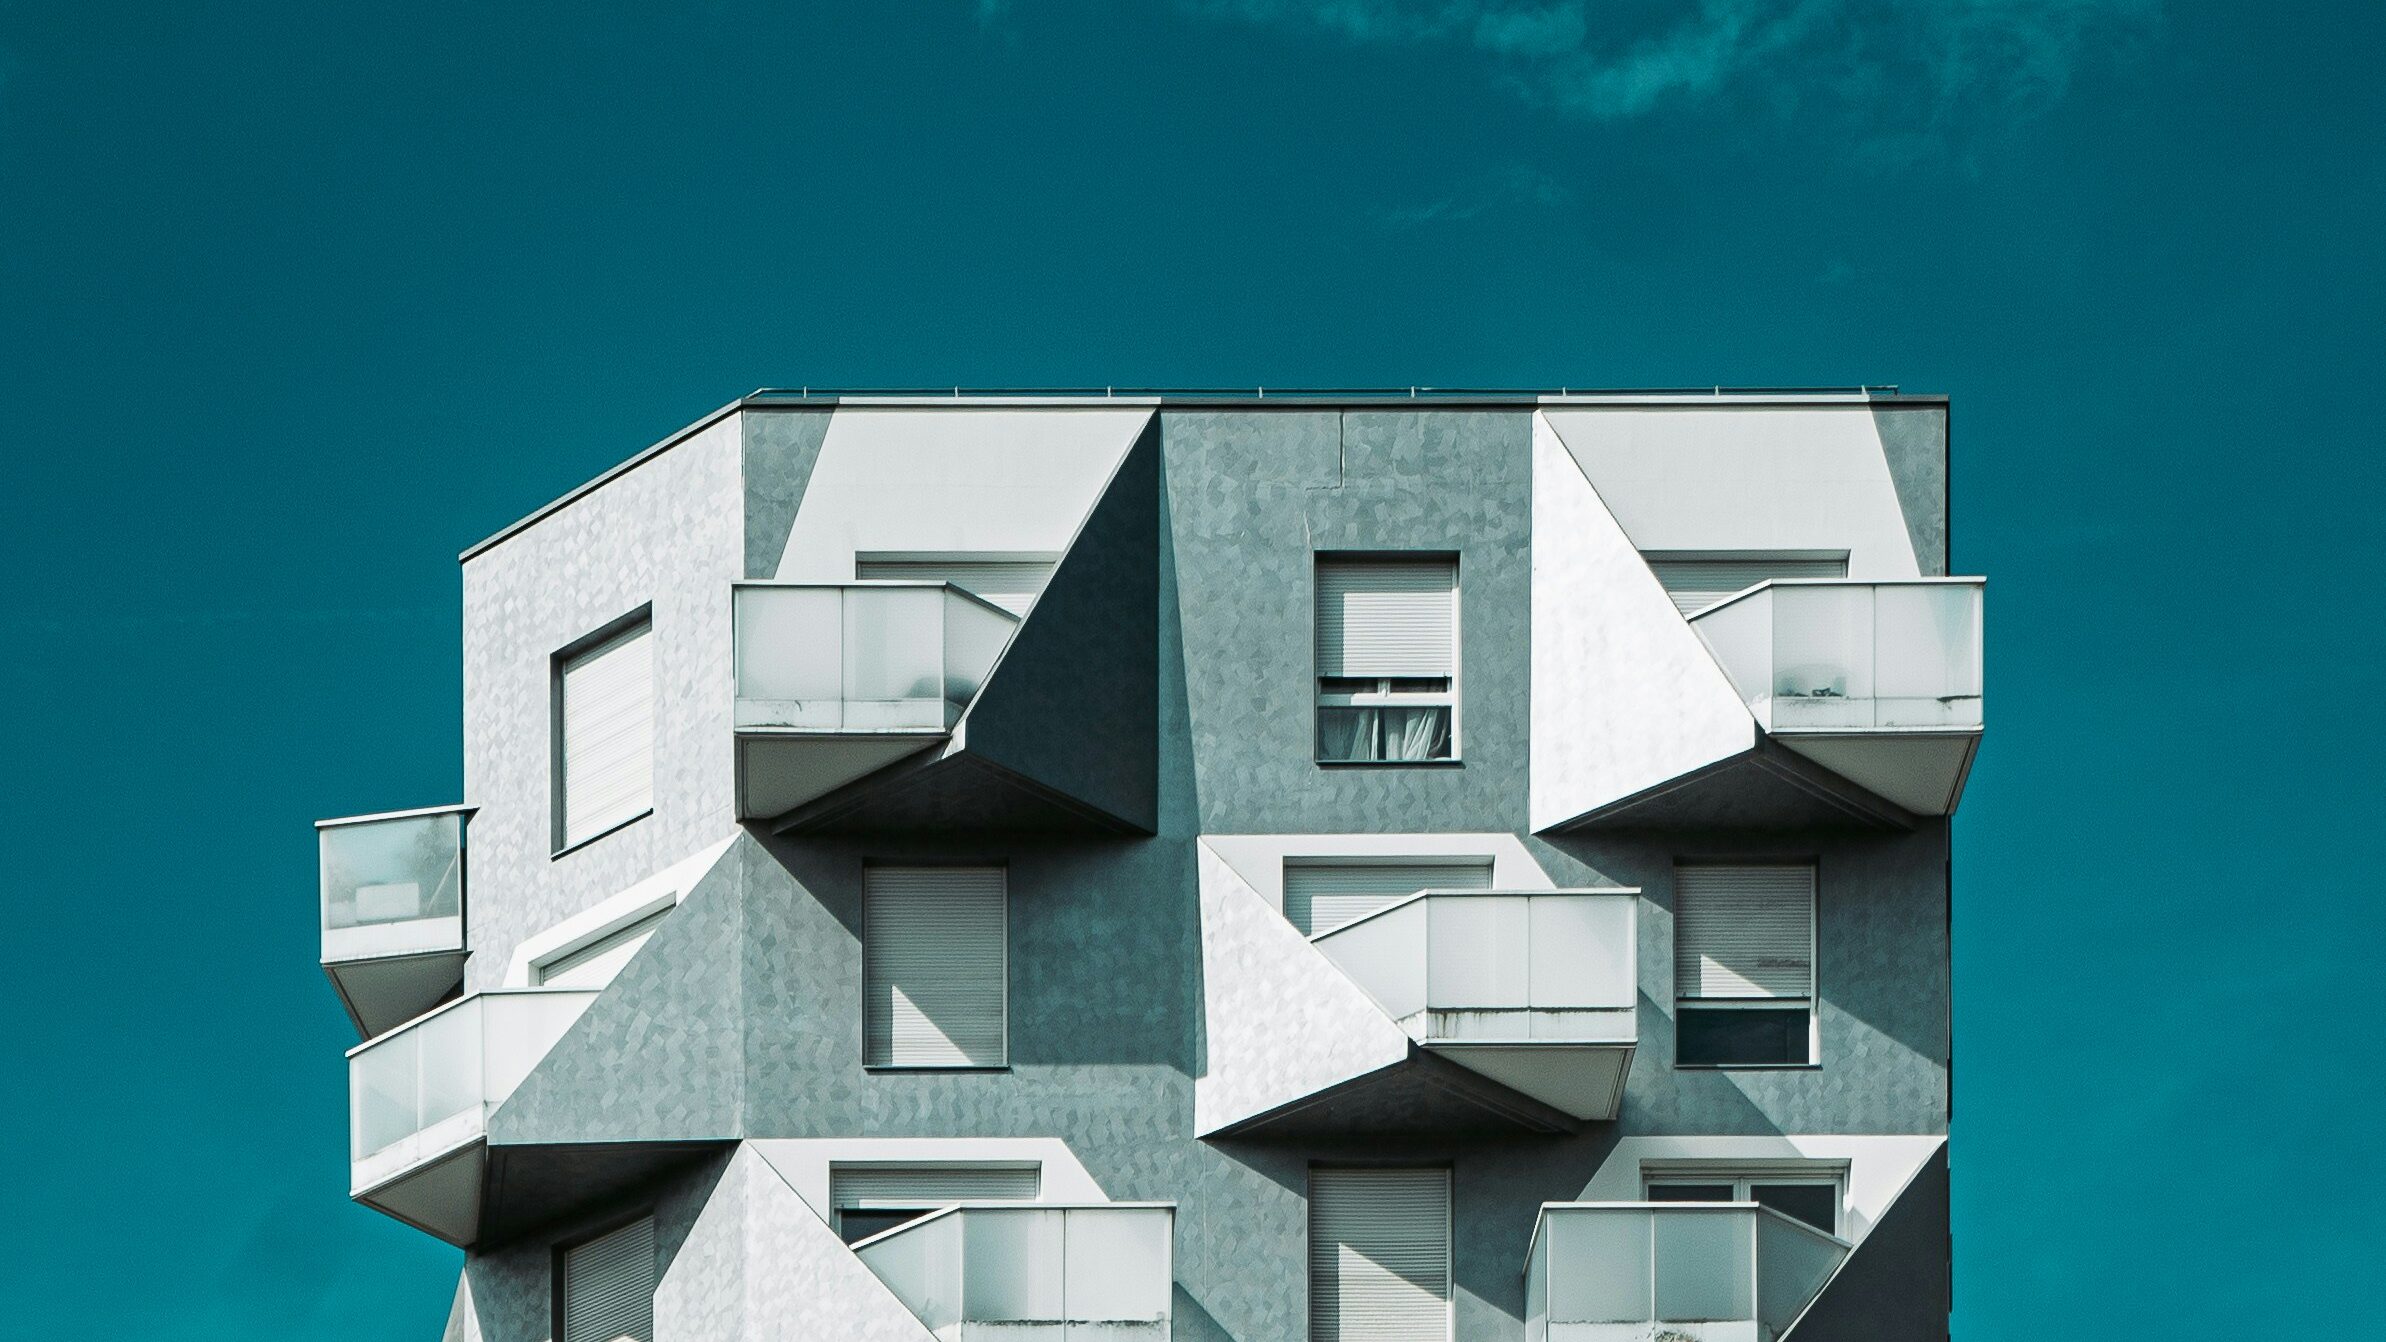 sfr property management abstract gray condo building geometrical on blue sky